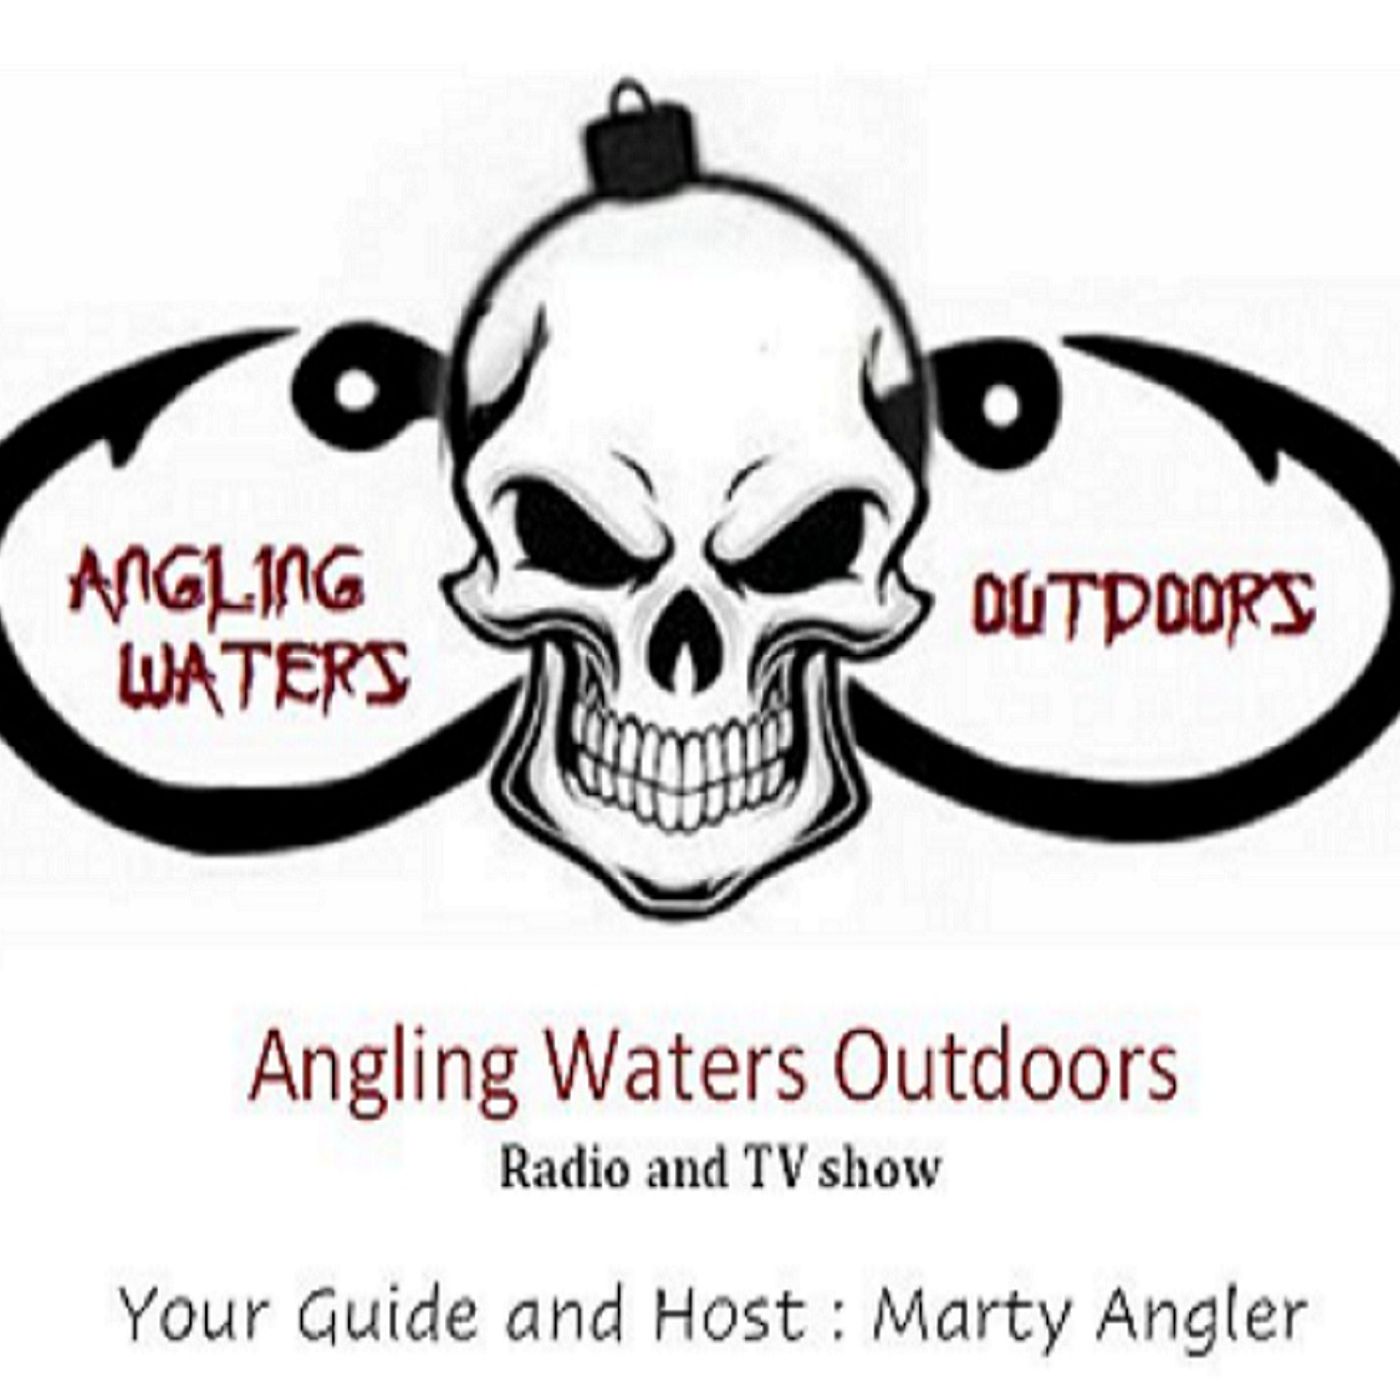 Angling Waters Outdoors show 10/9/2021WHIW 101.3fM